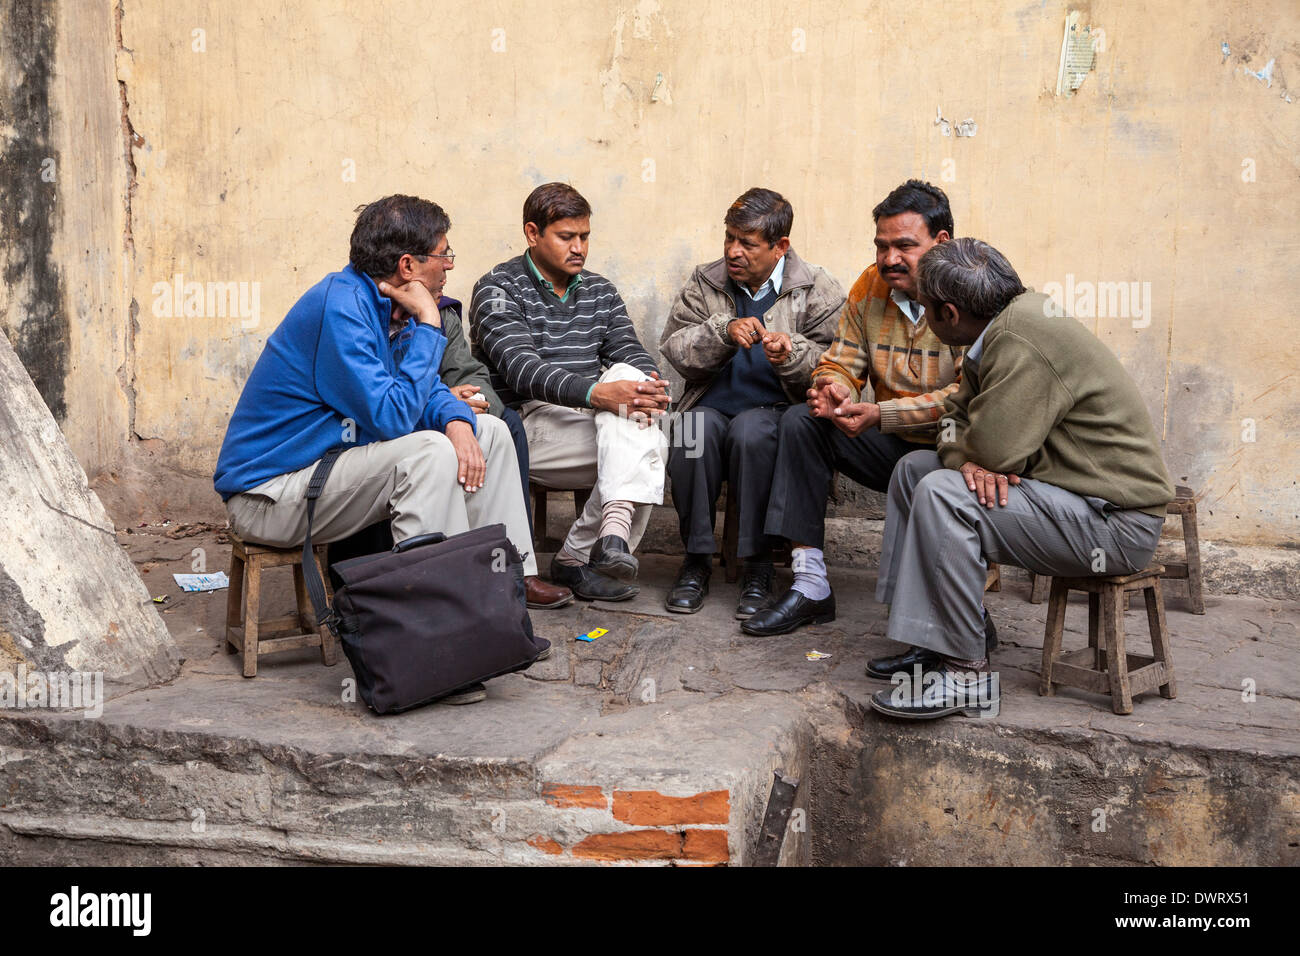 Jaipur, Rajasthan, India. Five Men in Discussion. Stock Photo